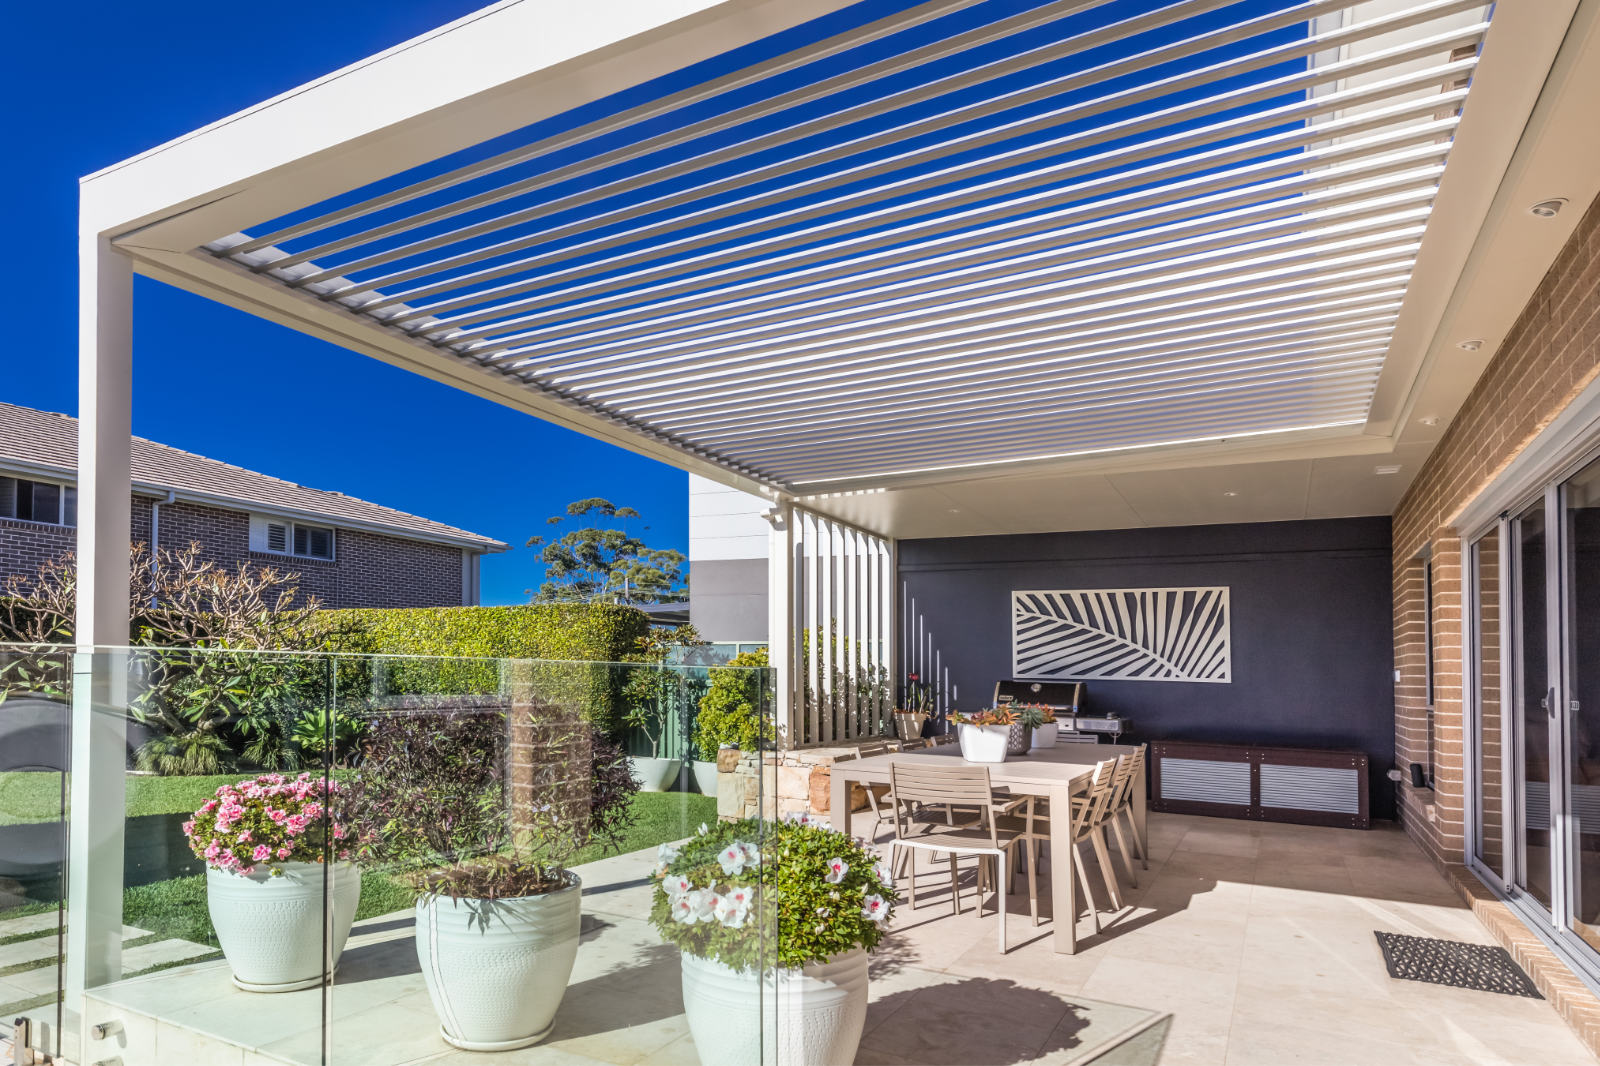 Tiled entertaining area at Gymea with an opening roof pergola